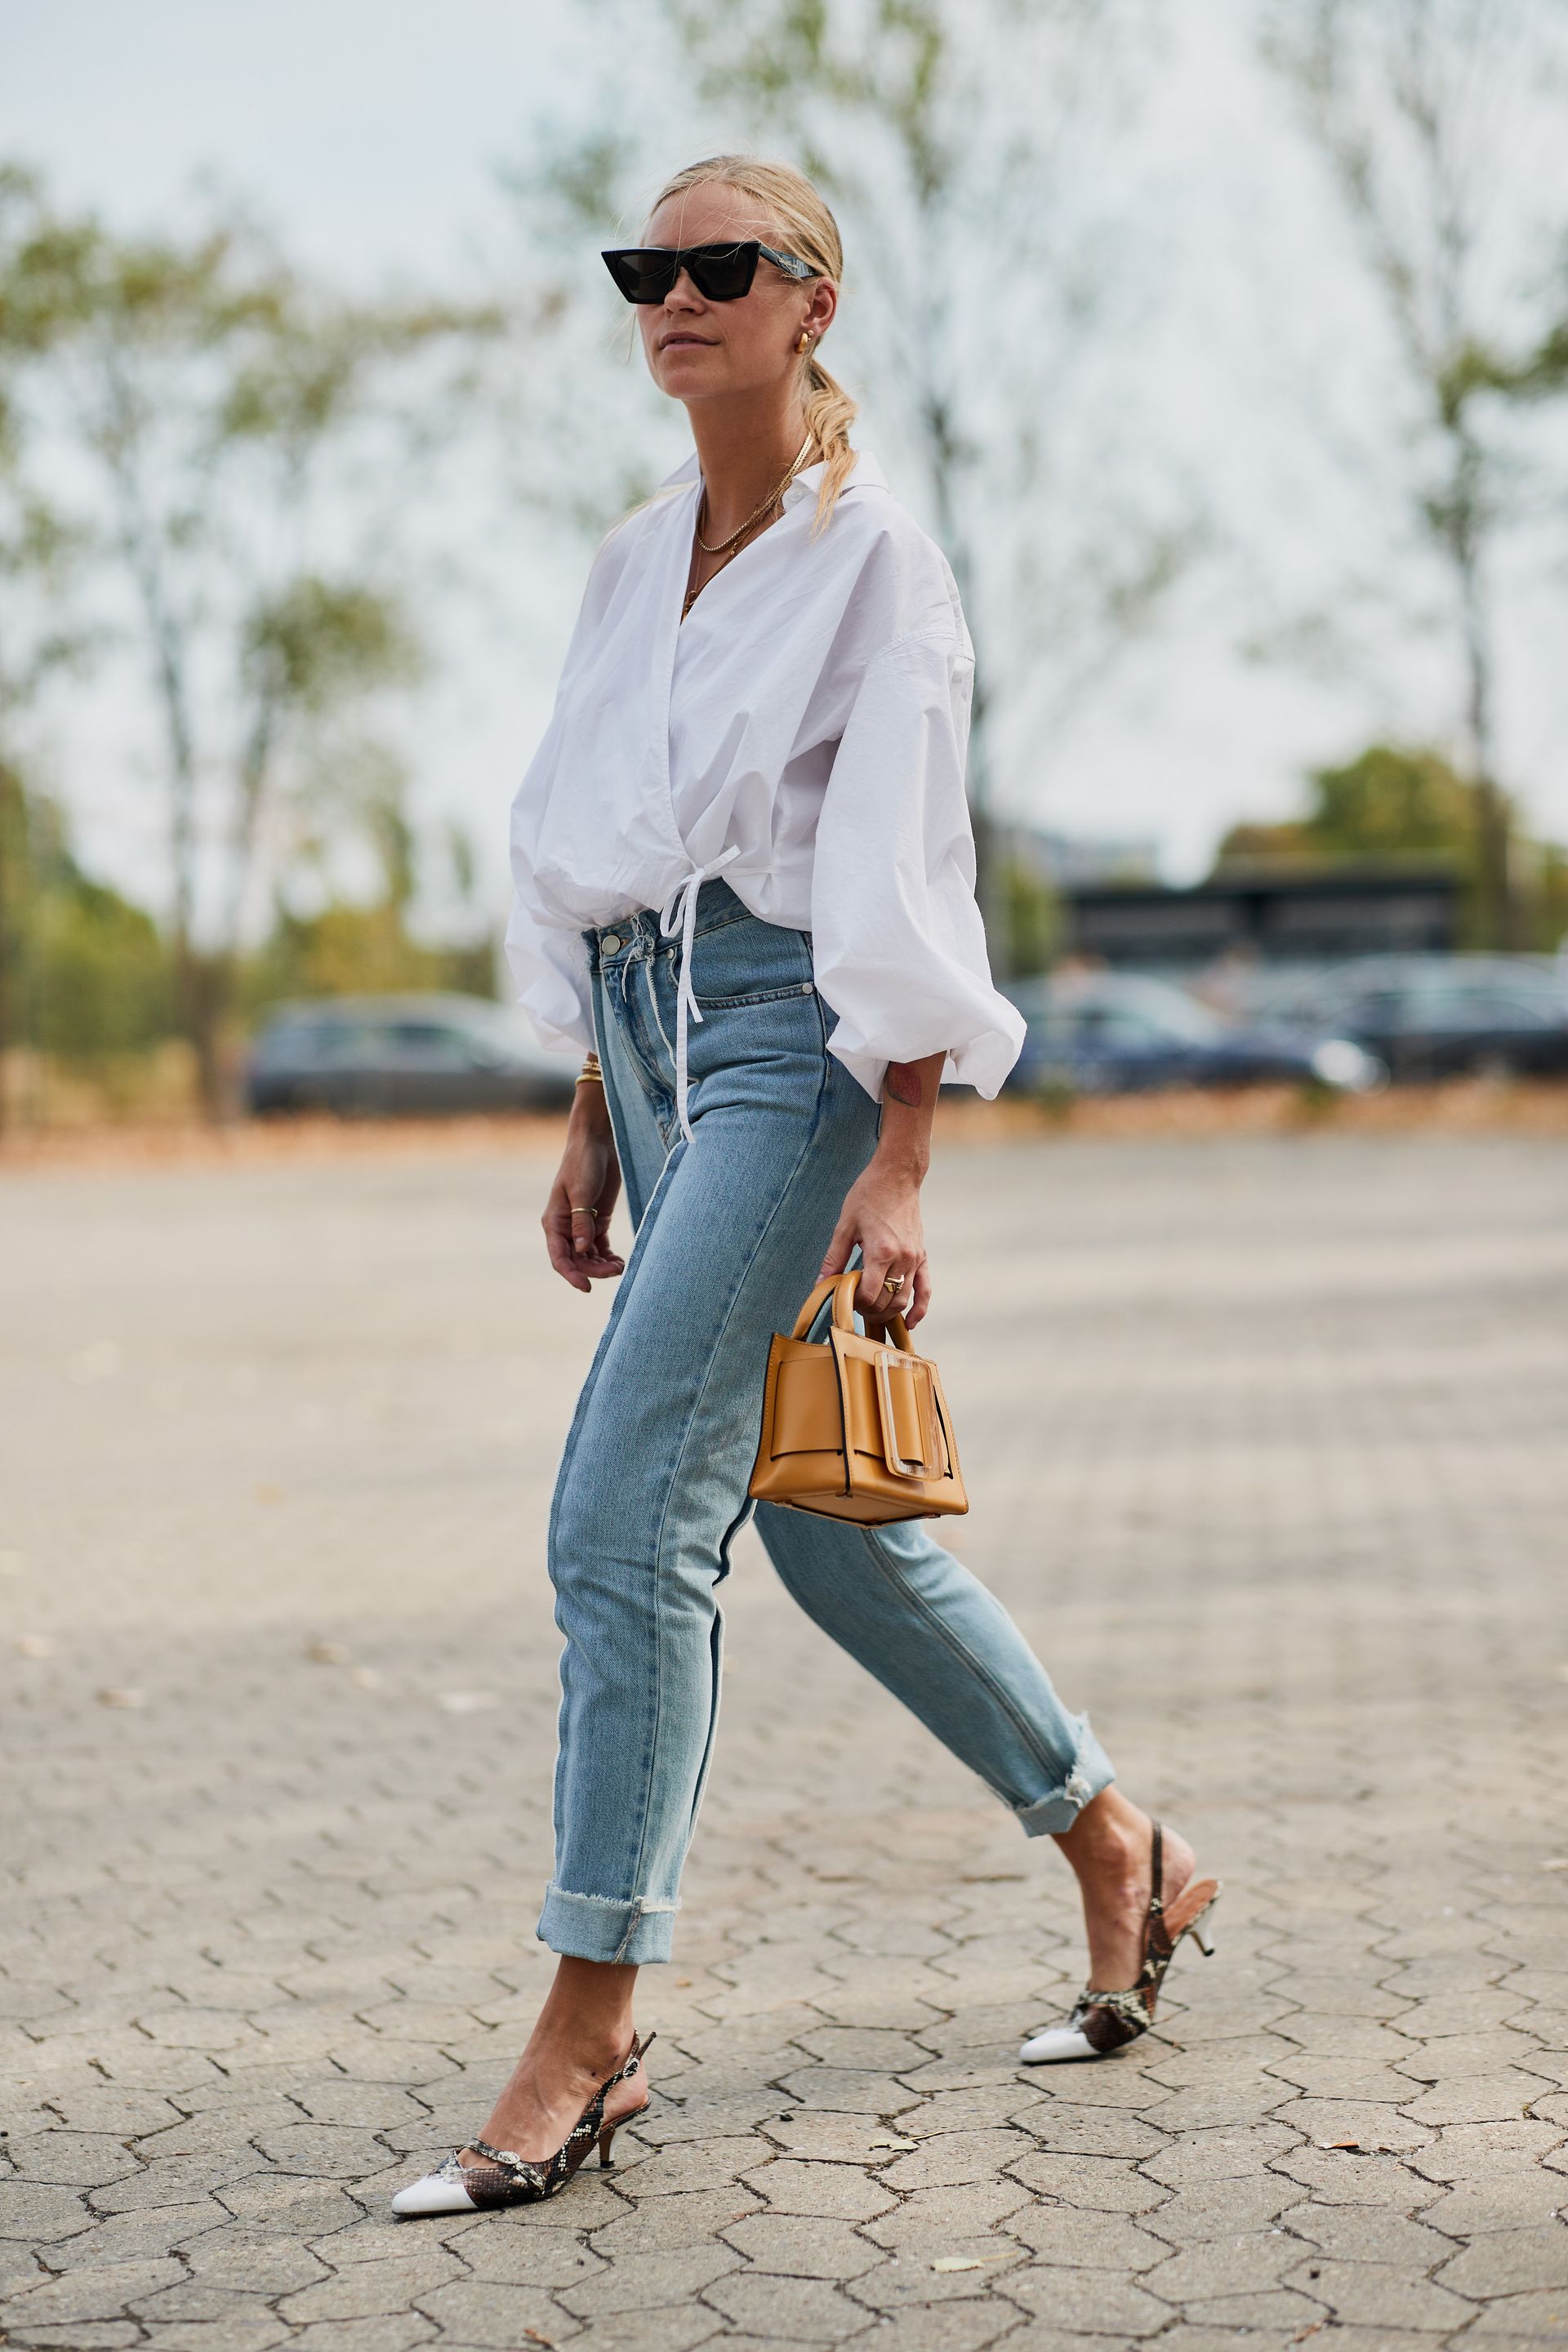 7 Easy Ways to Dress Up Your Jeans | Who What Wear